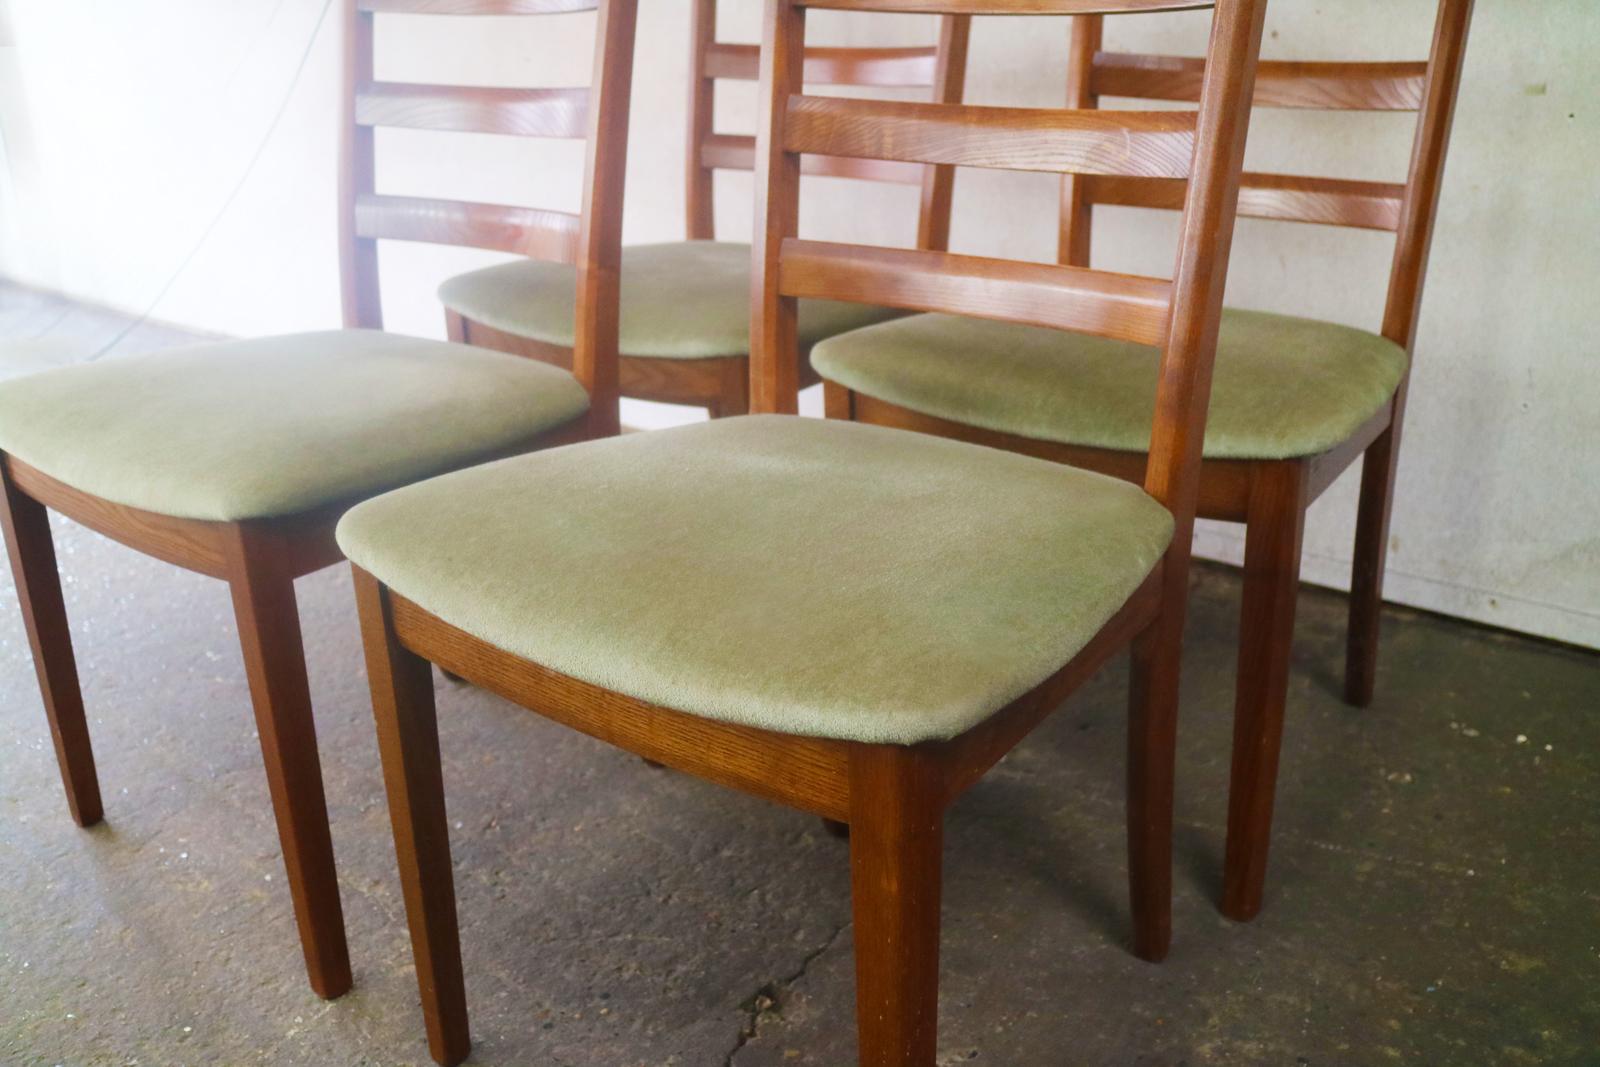 A handsome set of four dining chairs upholstered in the original light green velour fabric.